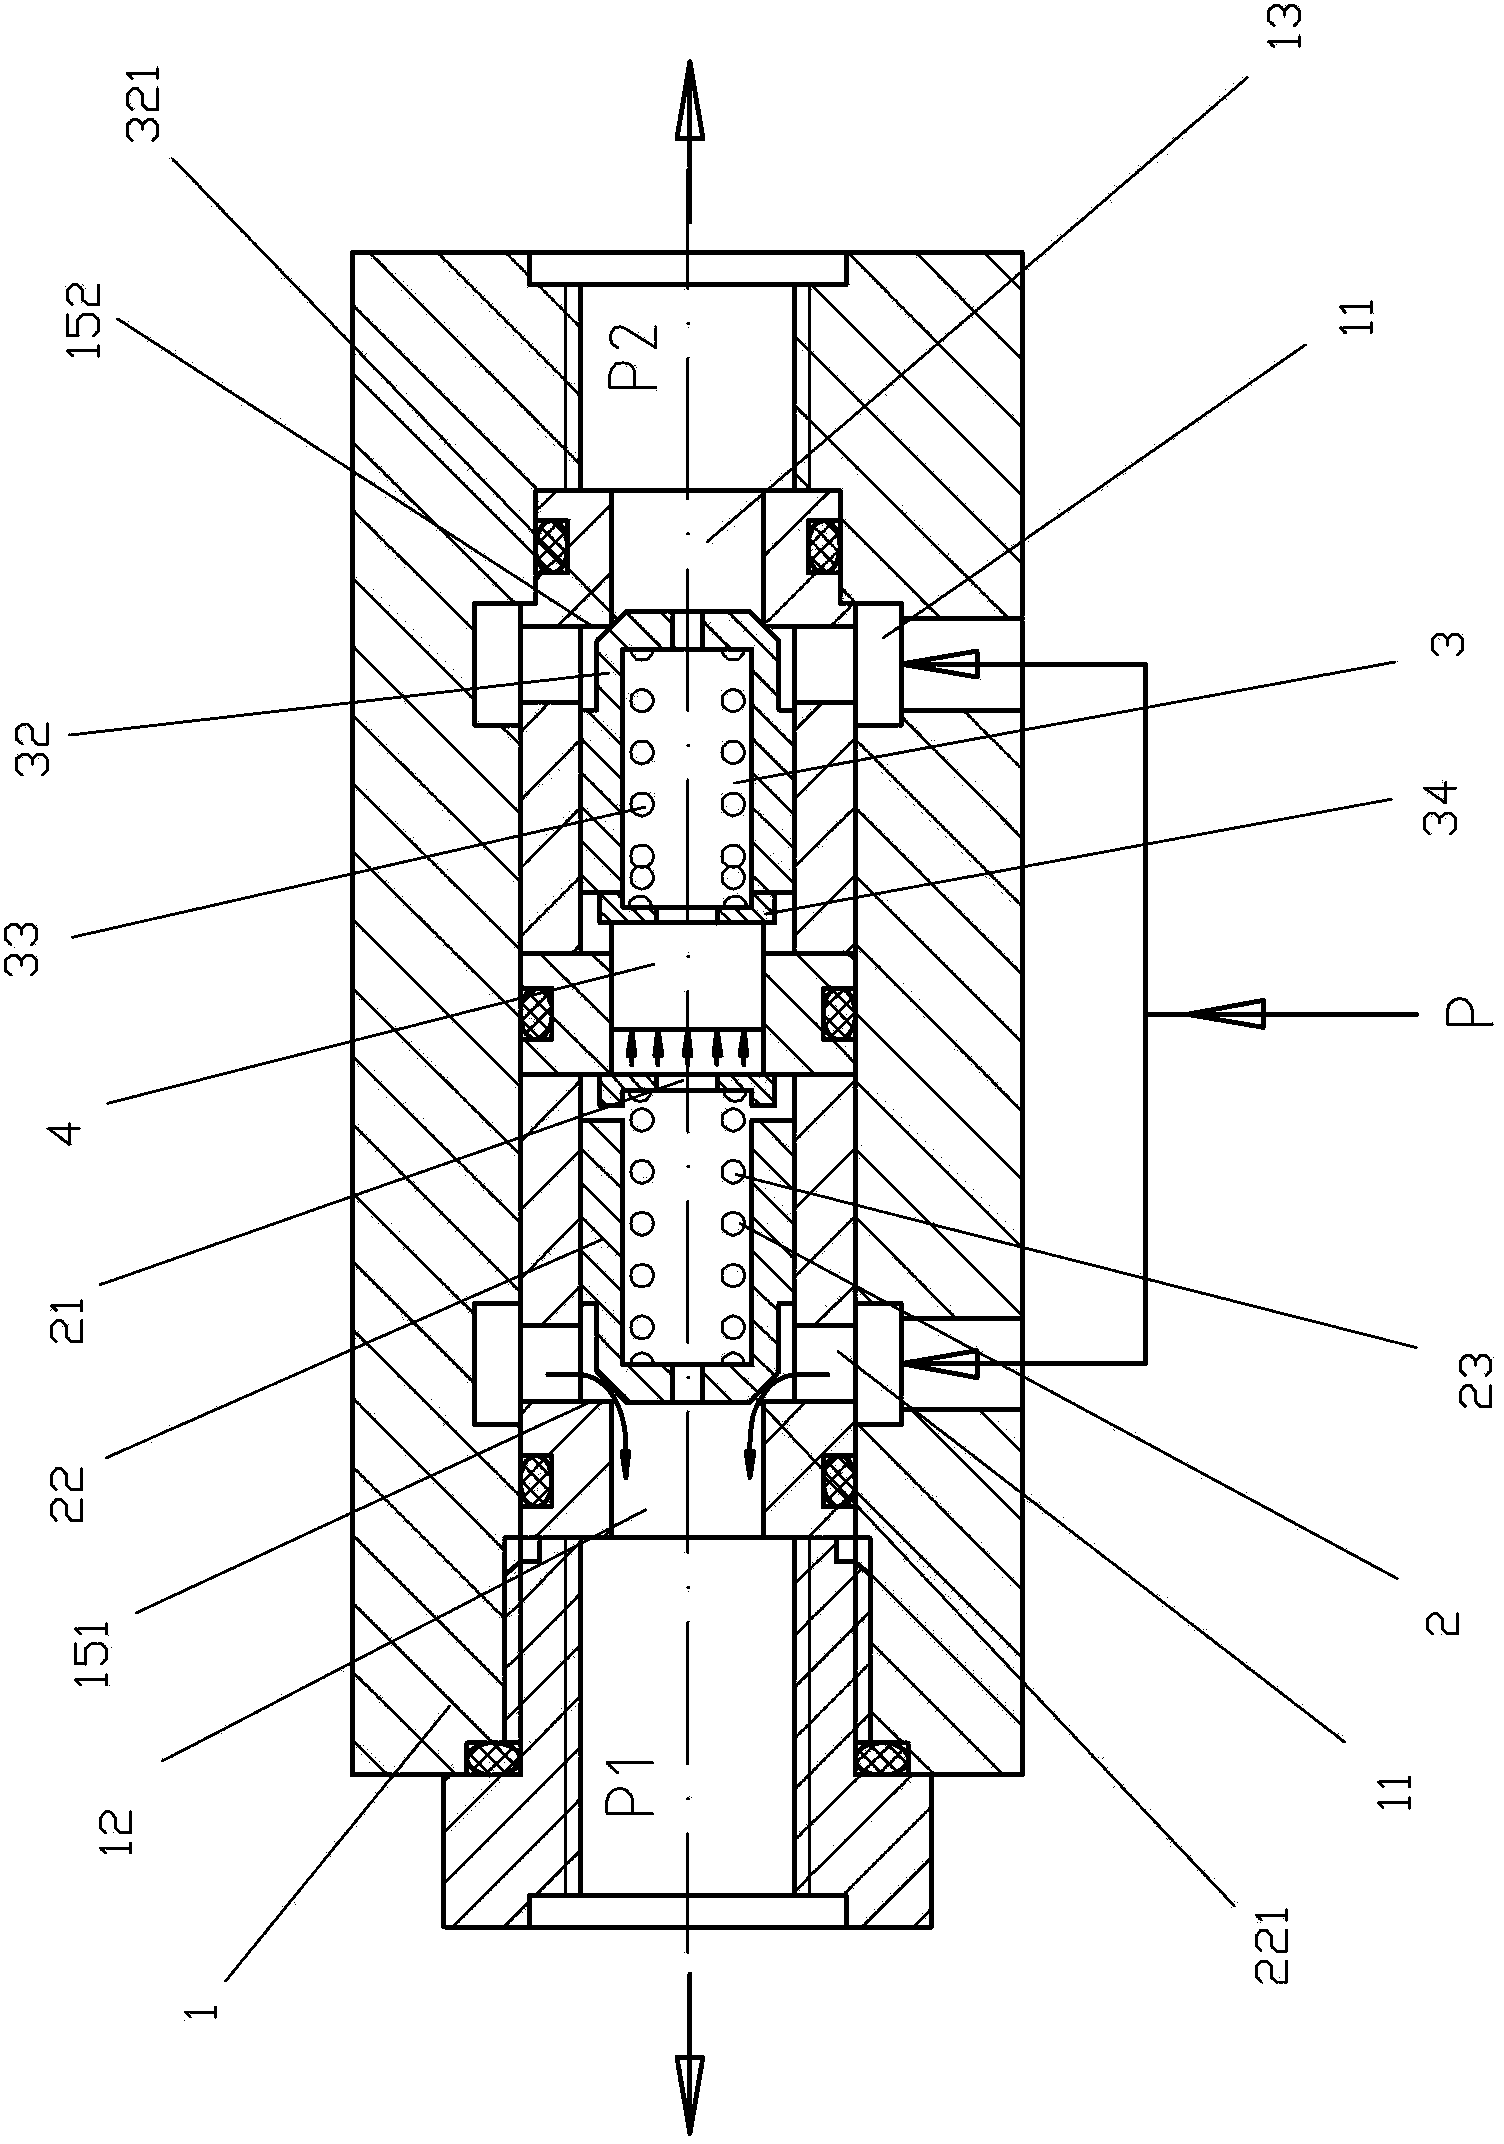 Dual-pipeline hydraulic safety valve